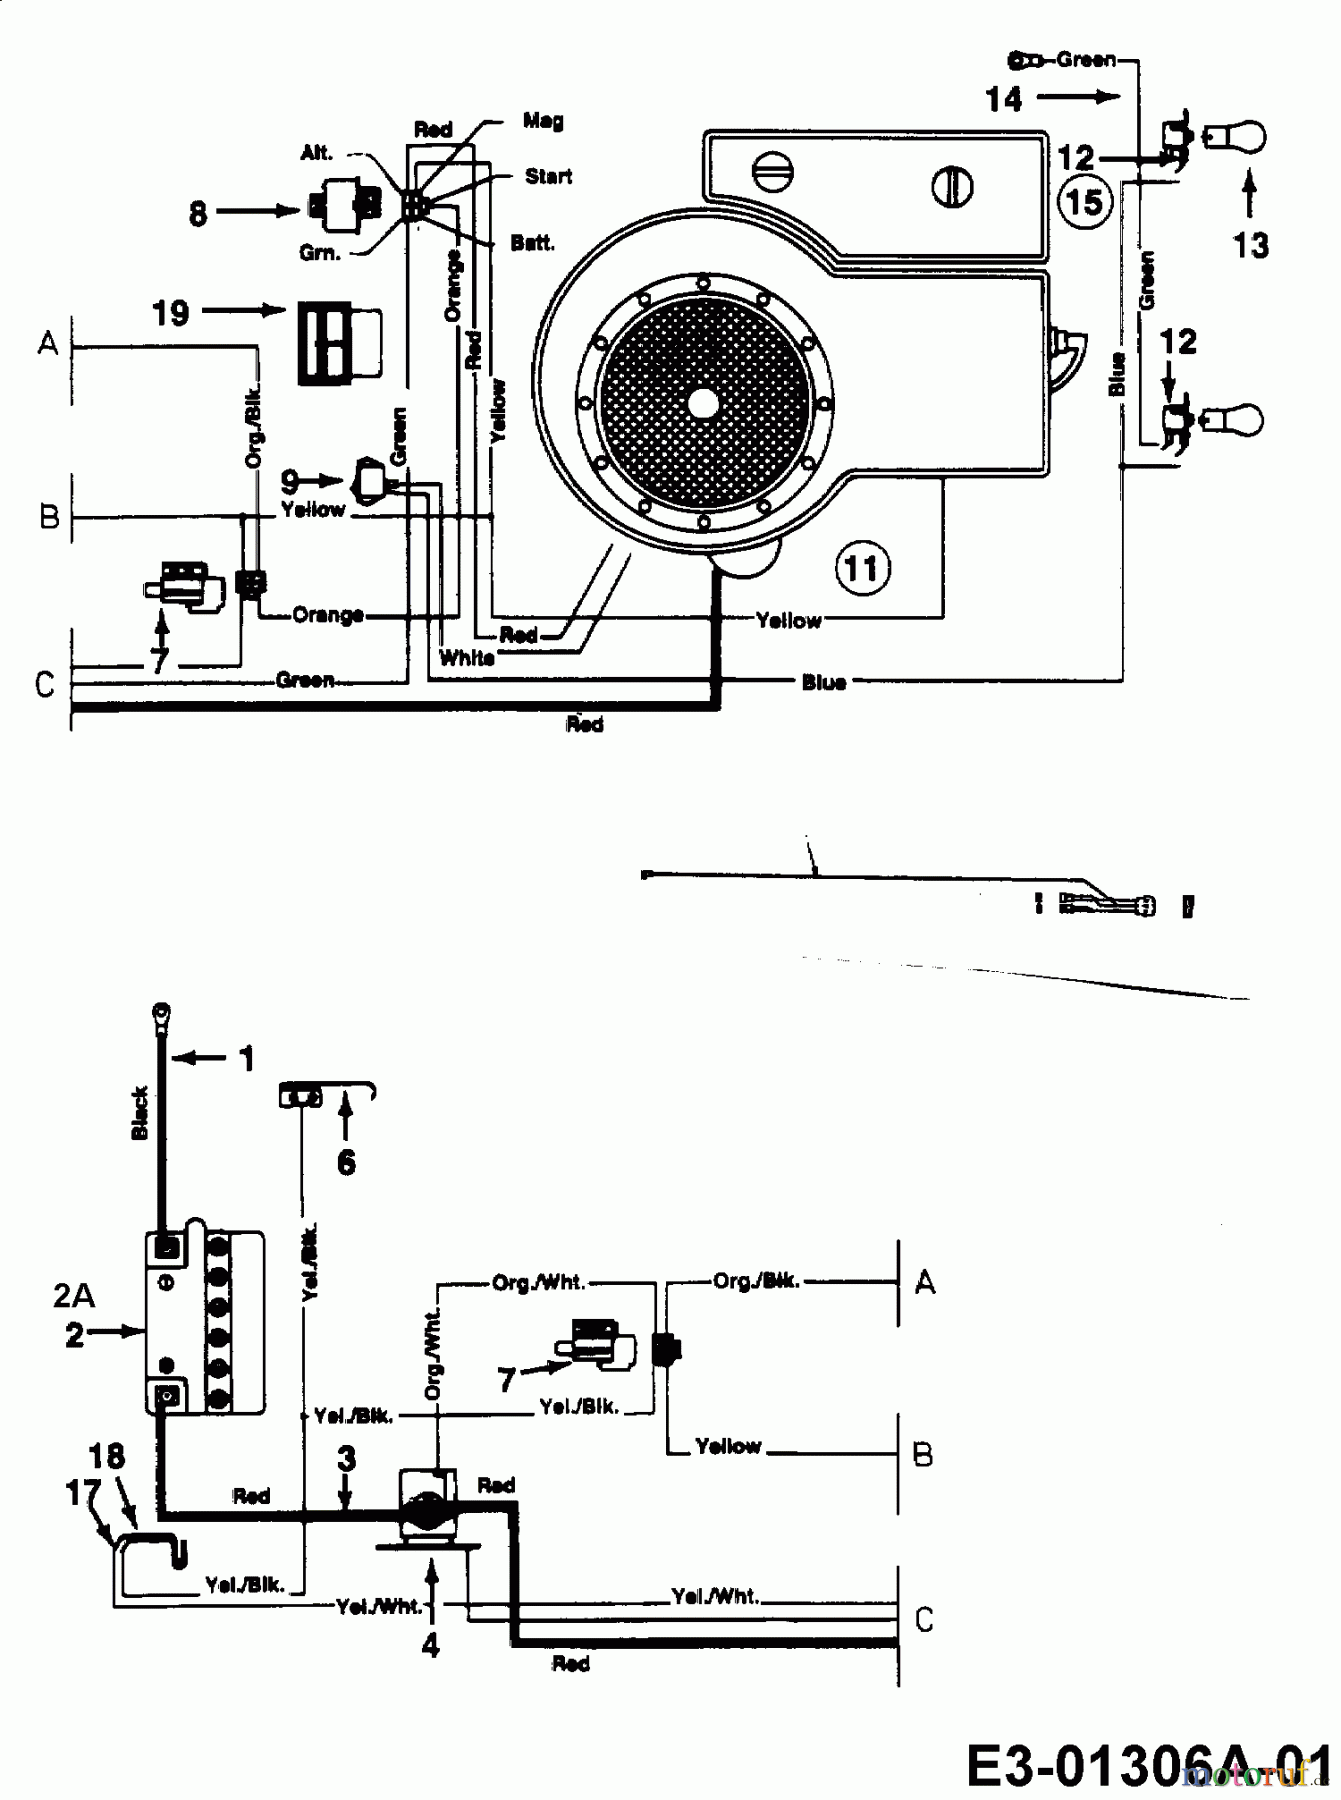  Edt Lawn tractors EDT 115-76 13AC452C610  (1998) Wiring diagram single cylinder